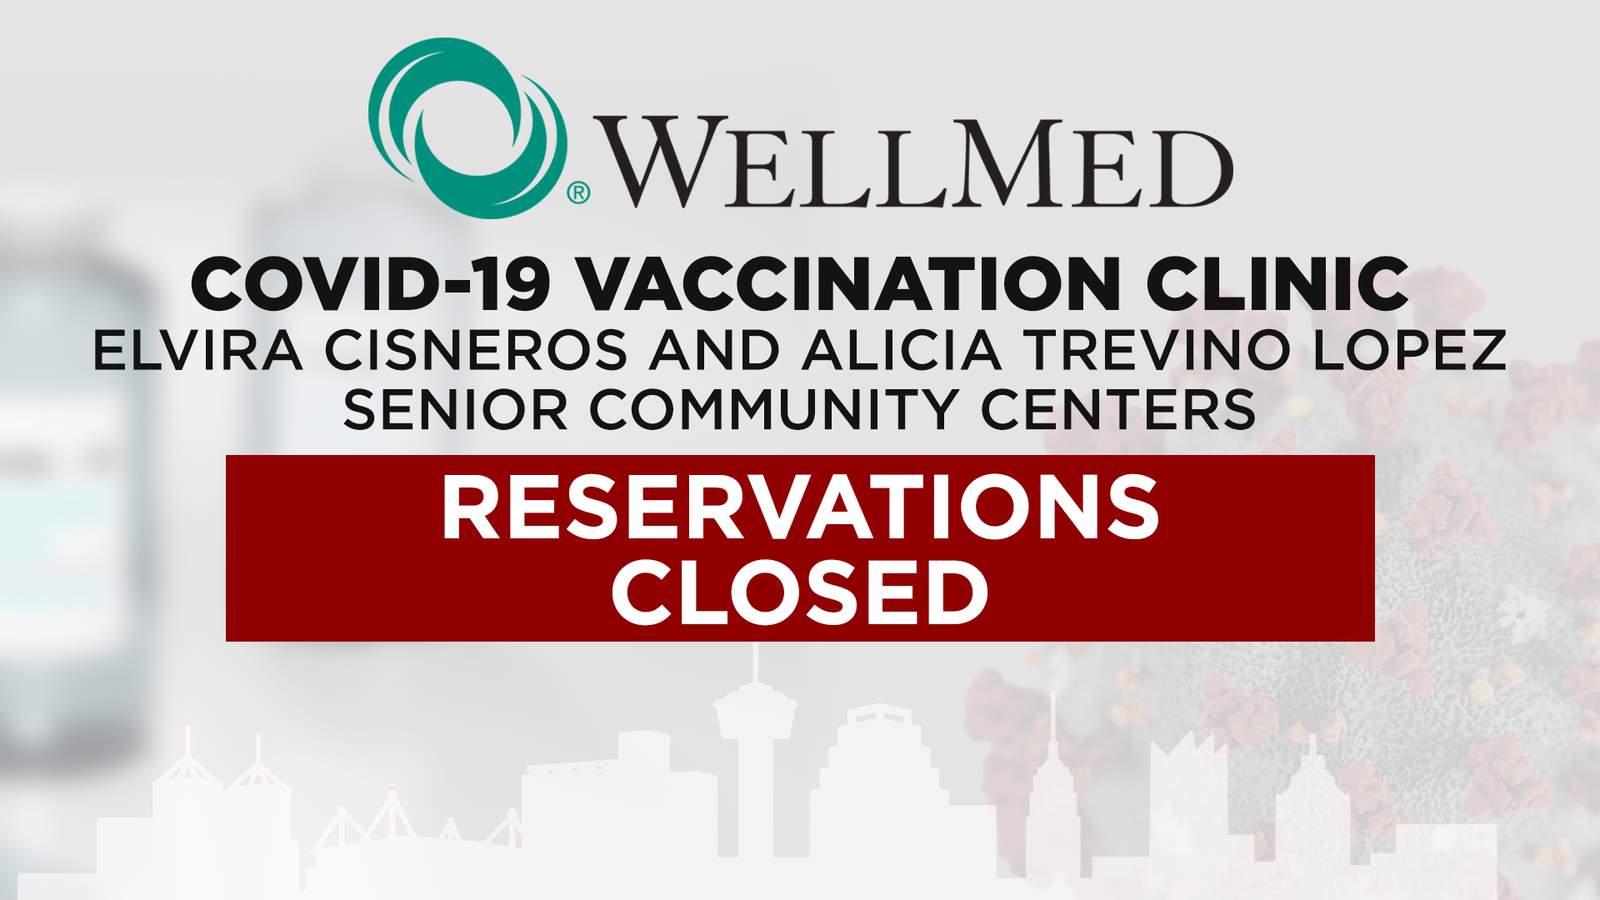 WellMed fills spots for 30,000 COVID-19 vaccines; reservation hotline closed until more doses available